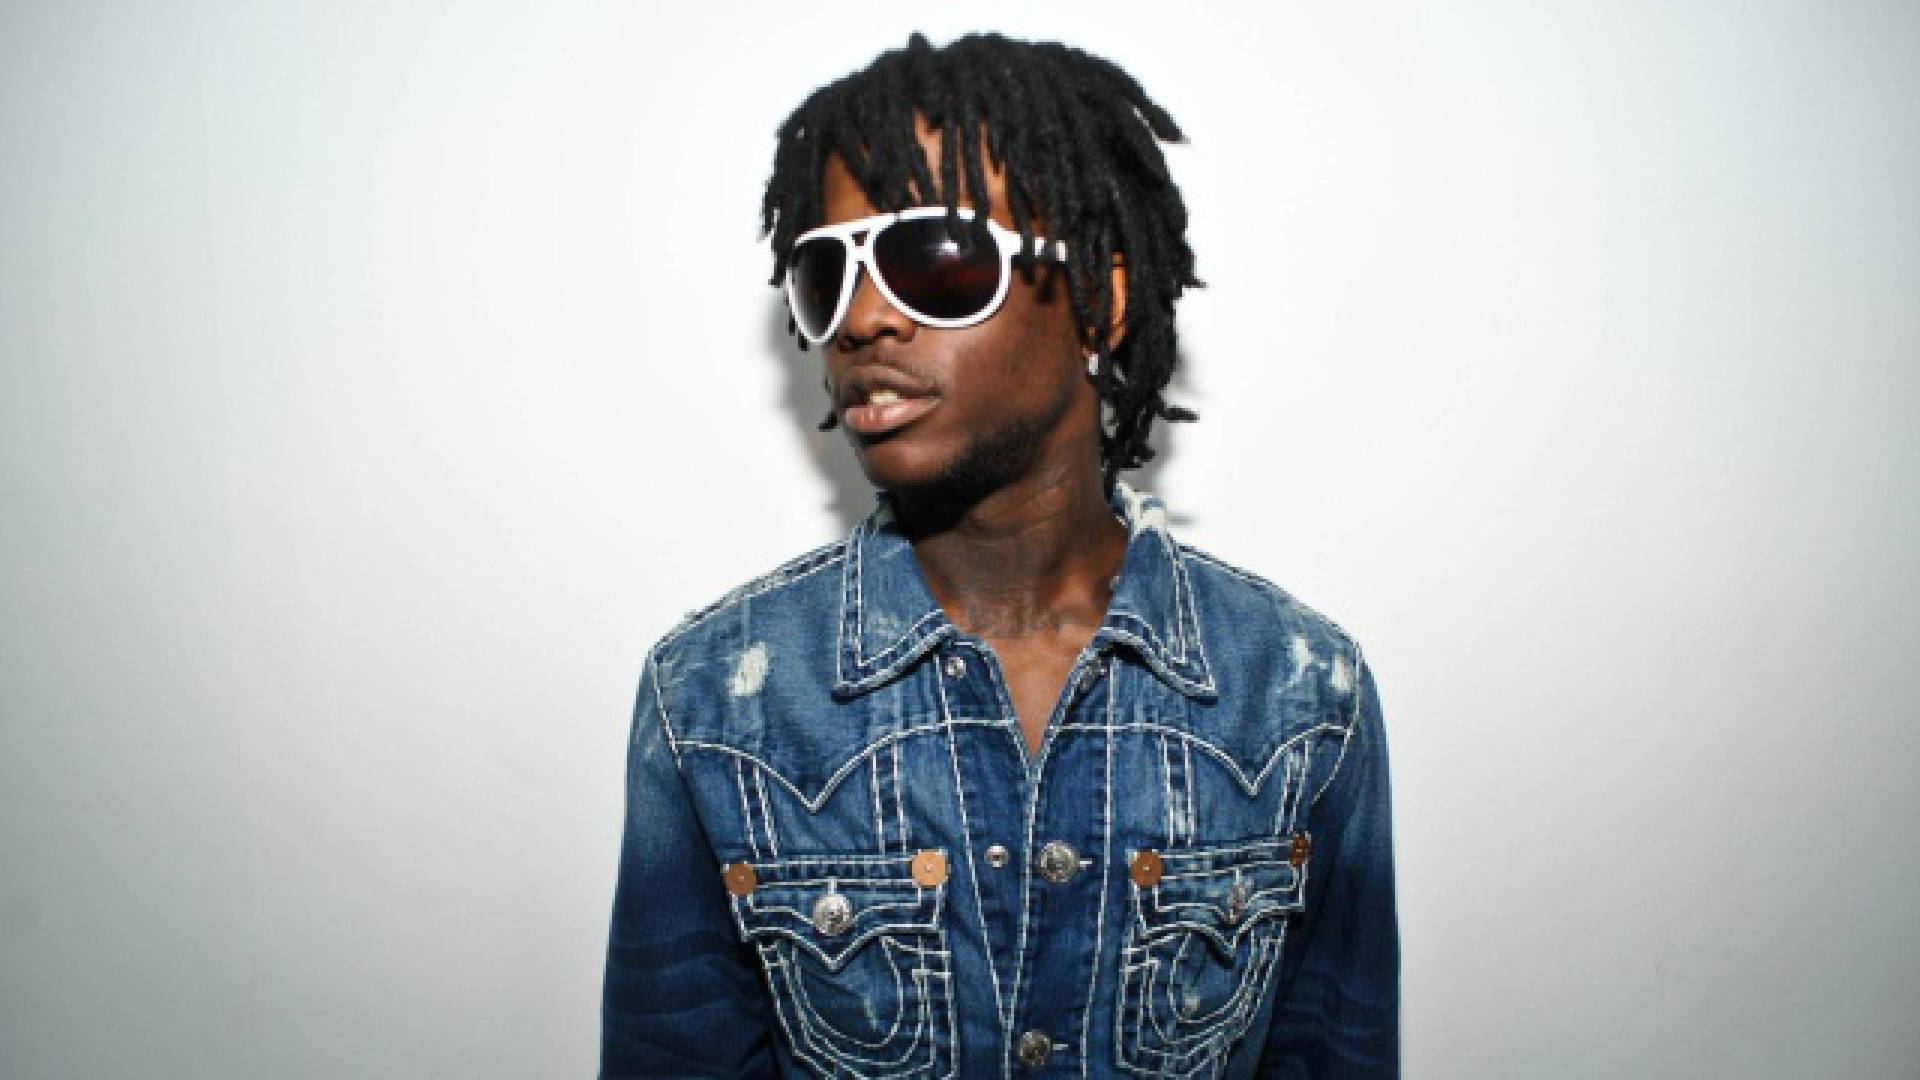 Chief Keef Denim Outfit Wallpaper